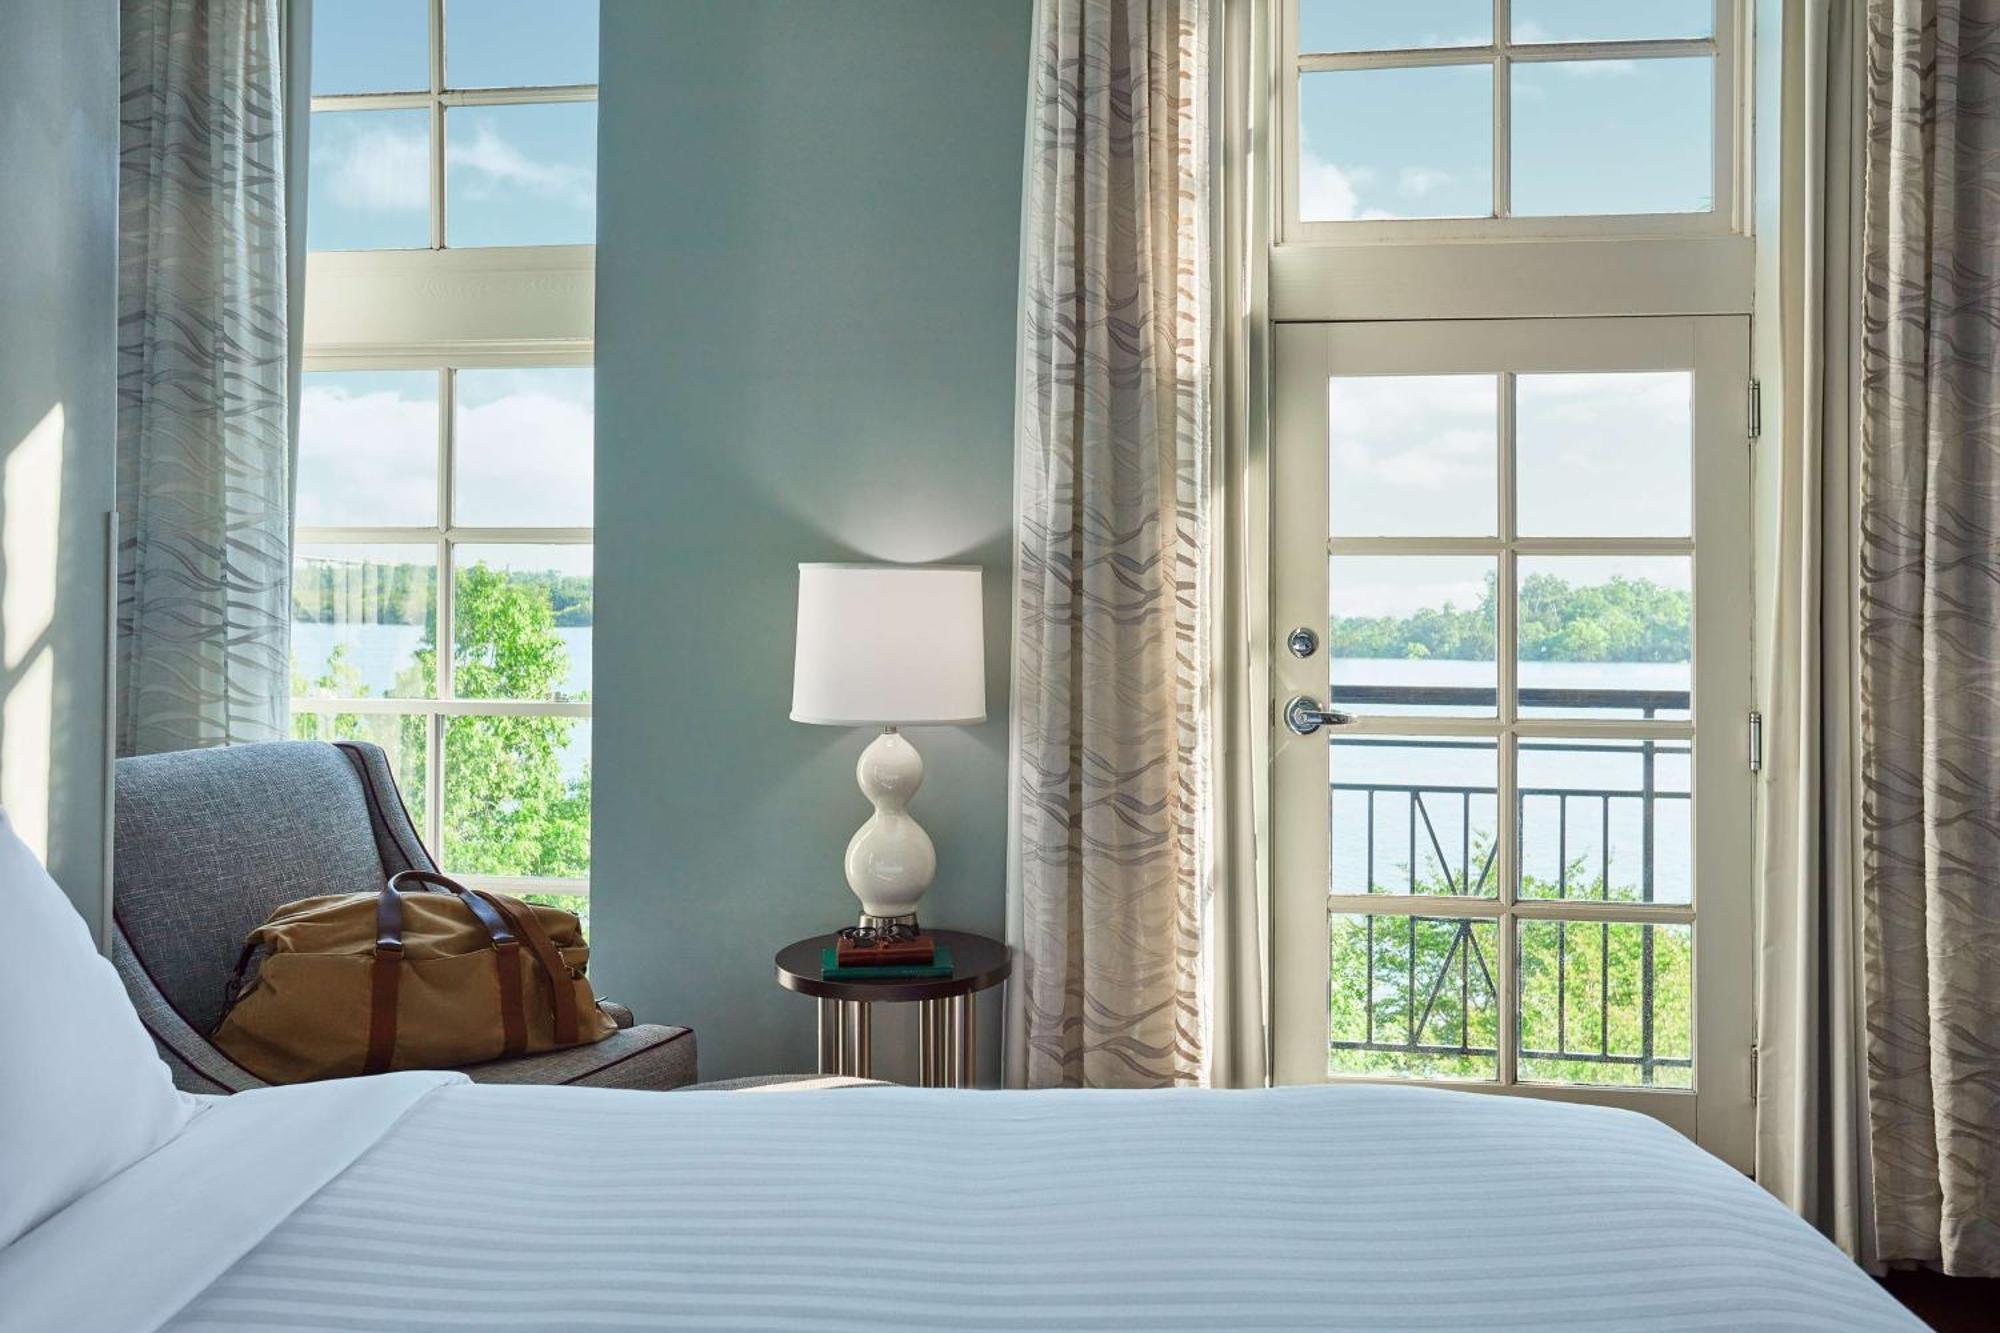 The Cotton Sail Hotel Savannah - Tapestry Collection By Hilton Экстерьер фото